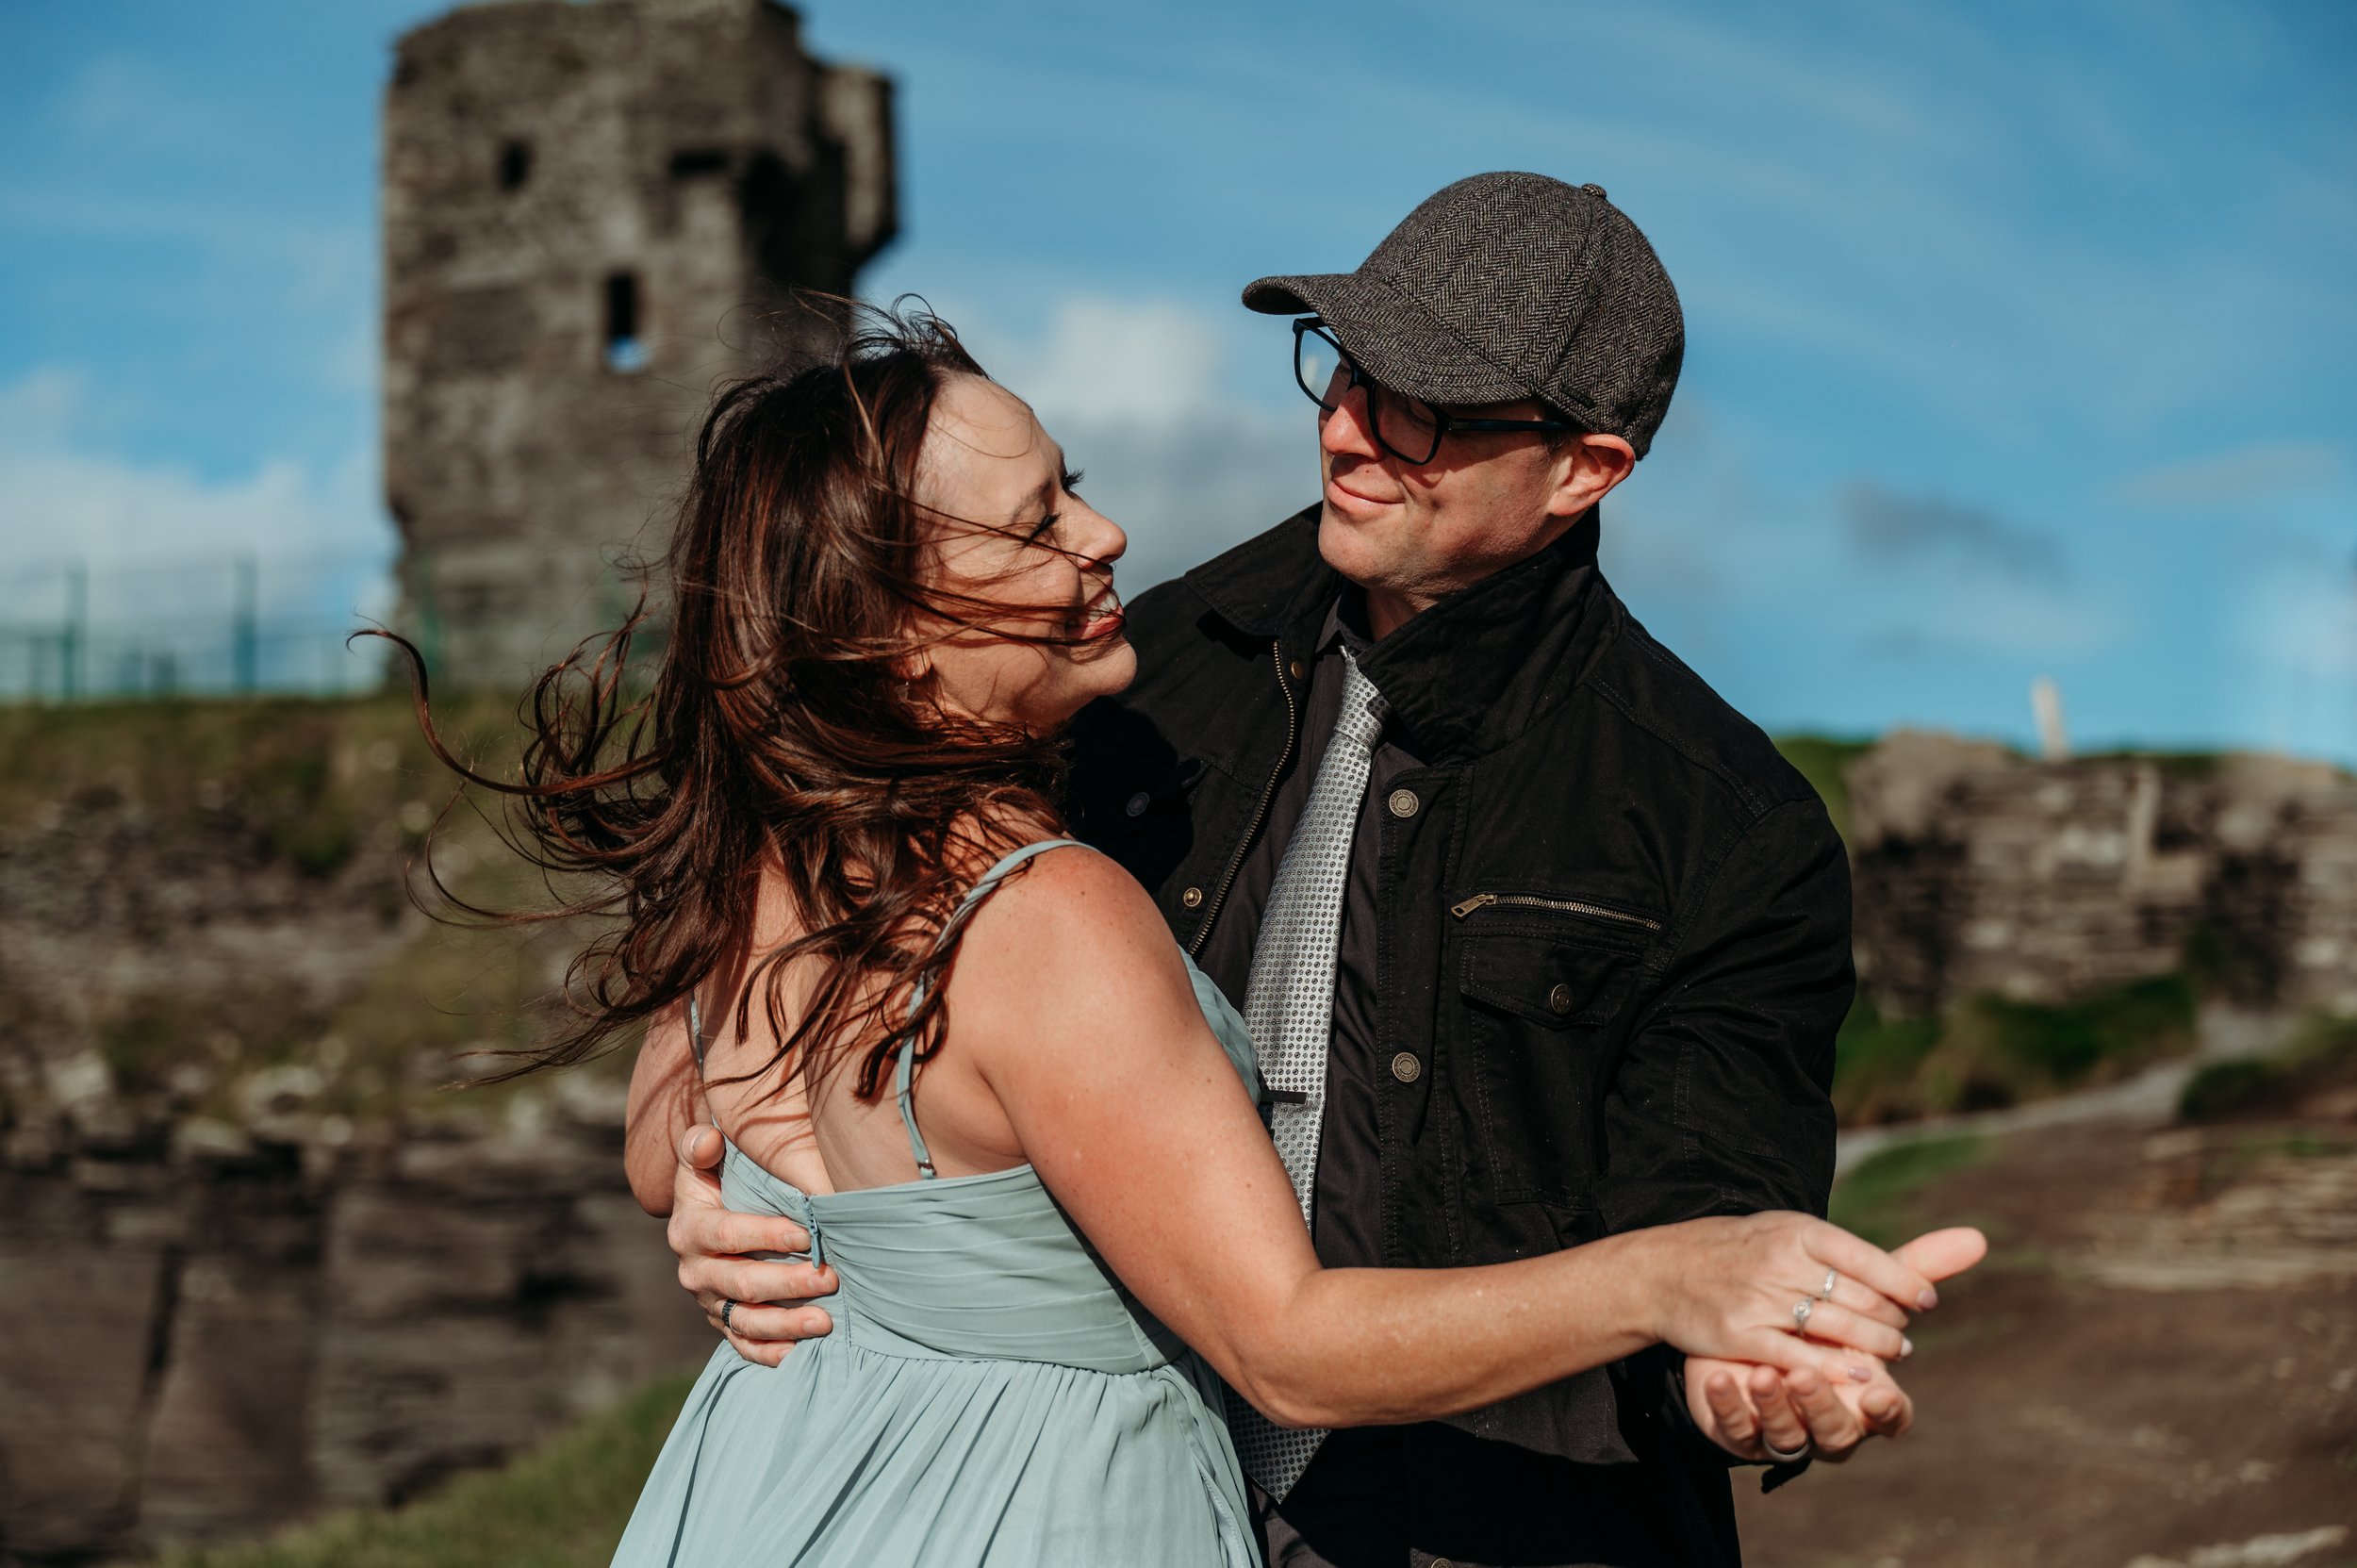 Marie O'Mahony photographer Cliffs of Moher anniversary couples photo session dancing with castle